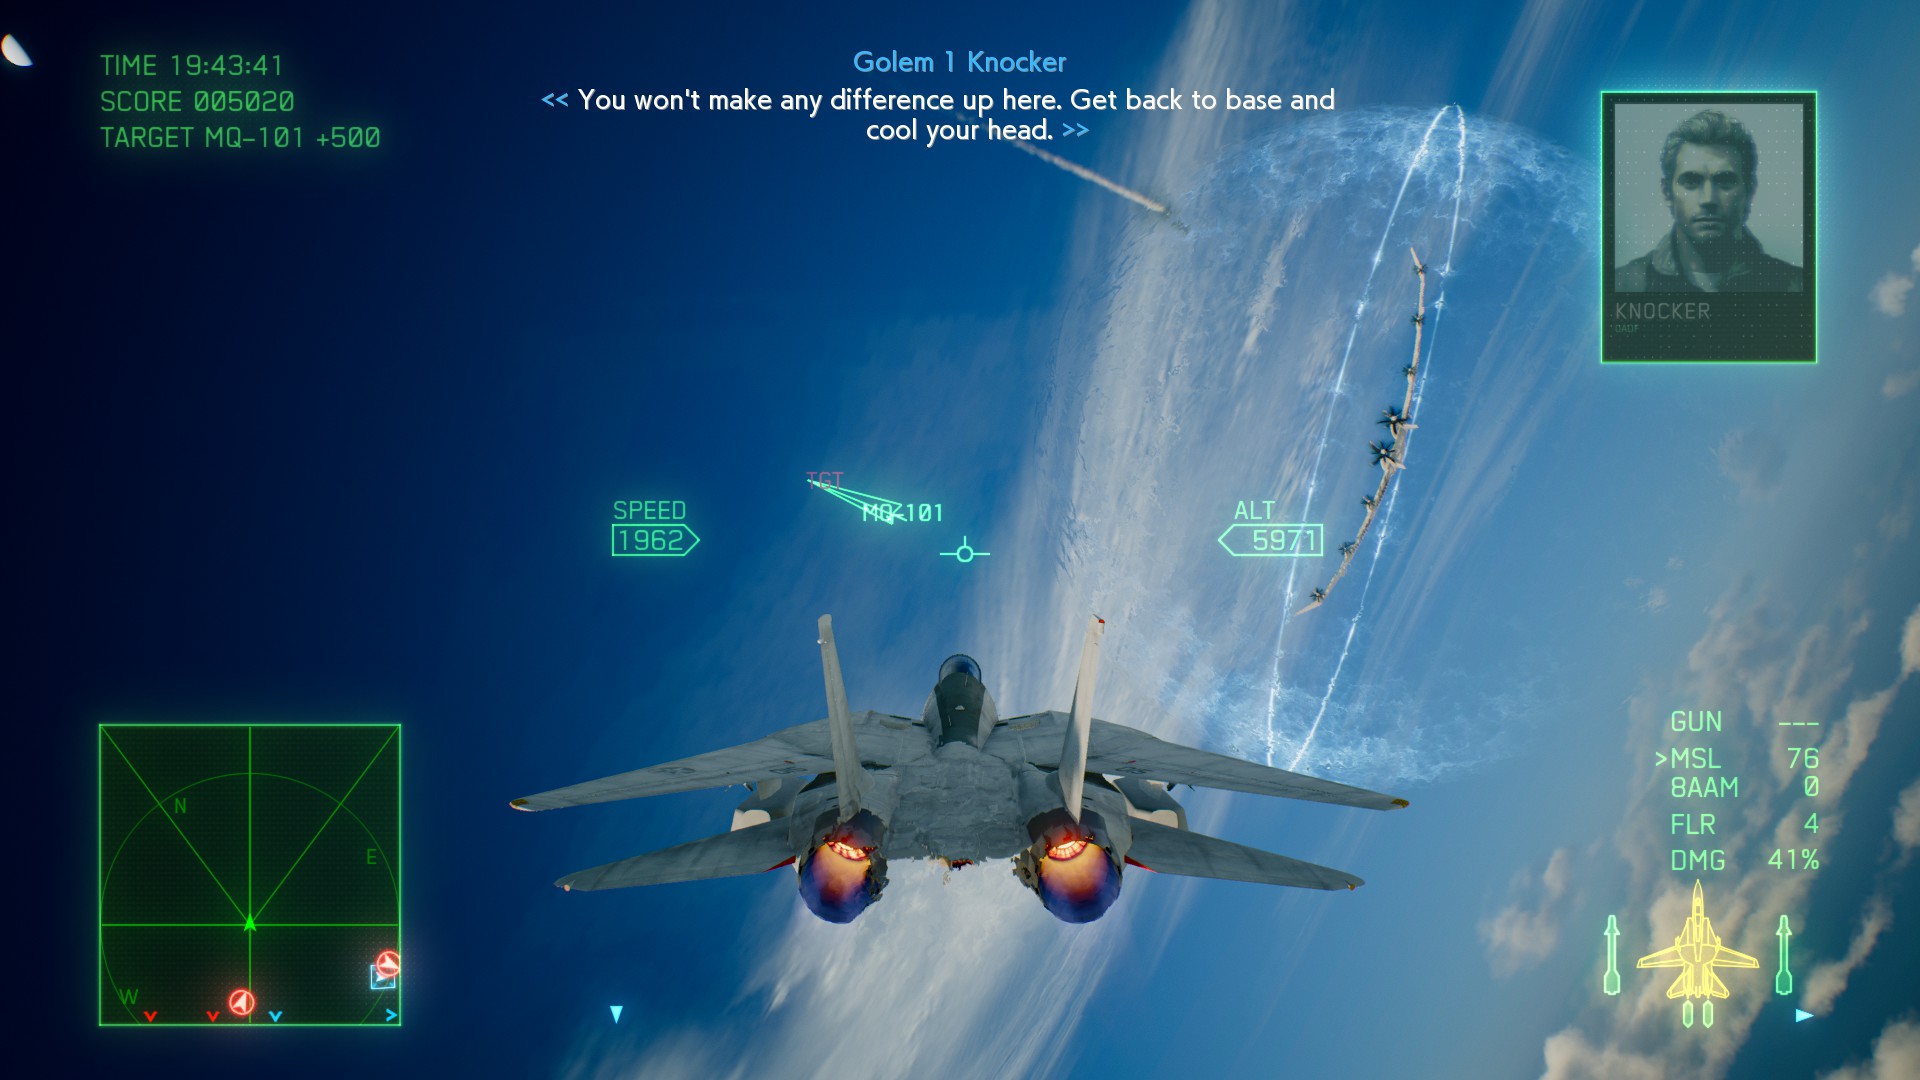 Ace Combat 7: Skies Unknown (ACTUAL Game Review) – cublikefoot